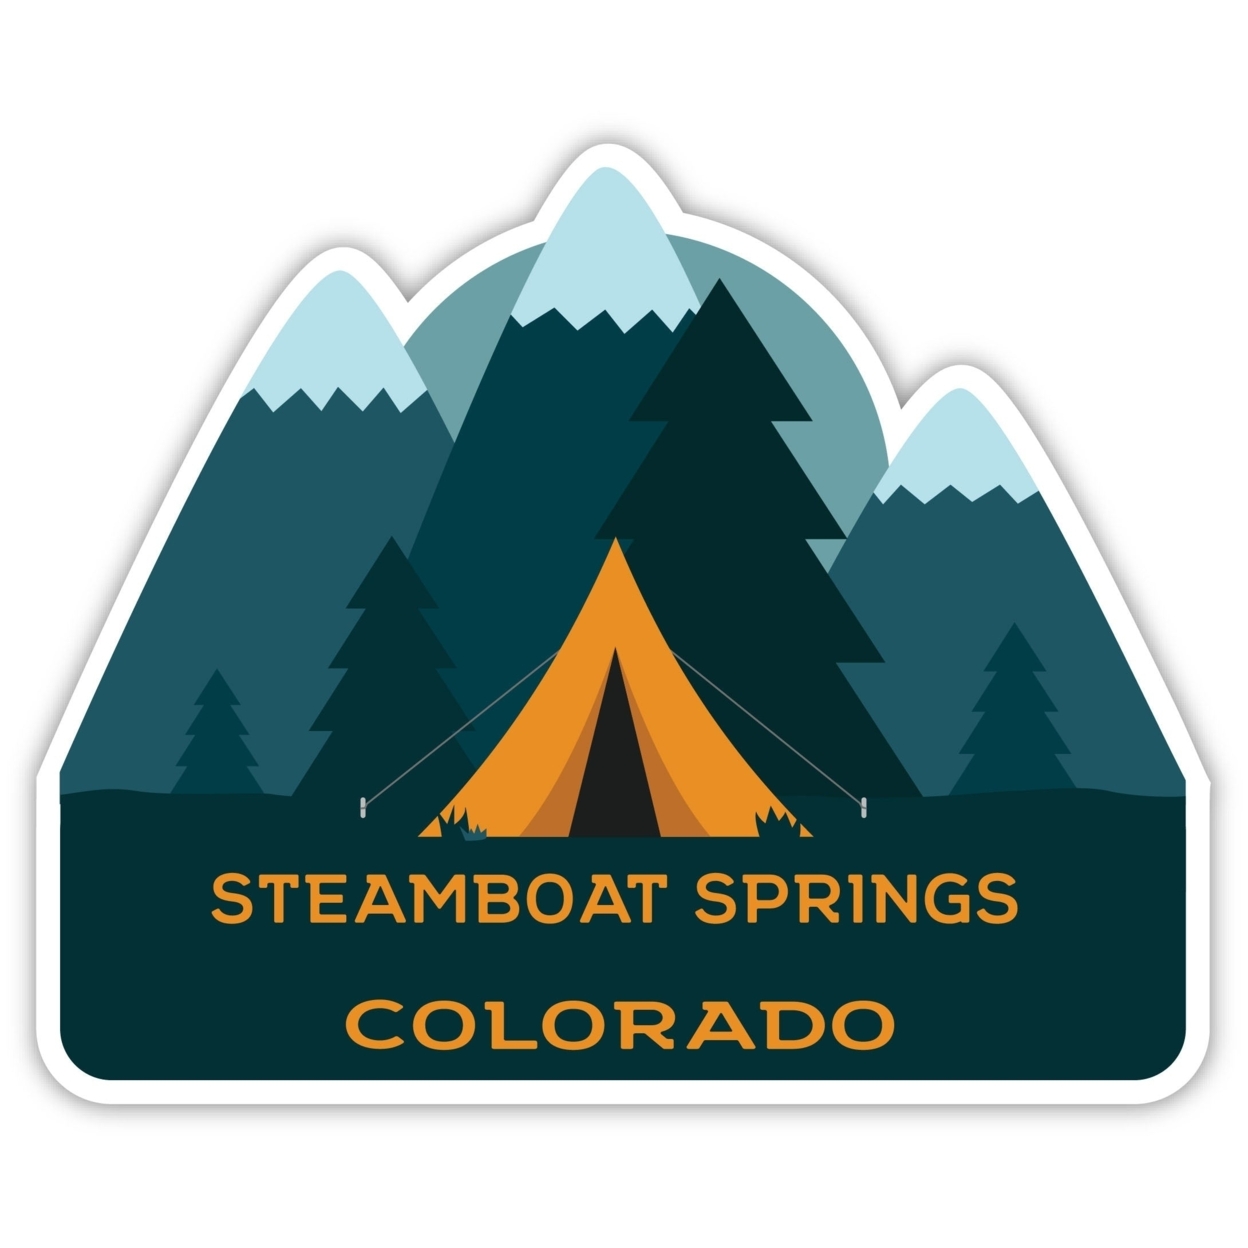 Steamboat Springs Colorado Souvenir Decorative Stickers (Choose Theme And Size) - Single Unit, 2-Inch, Adventures Awaits